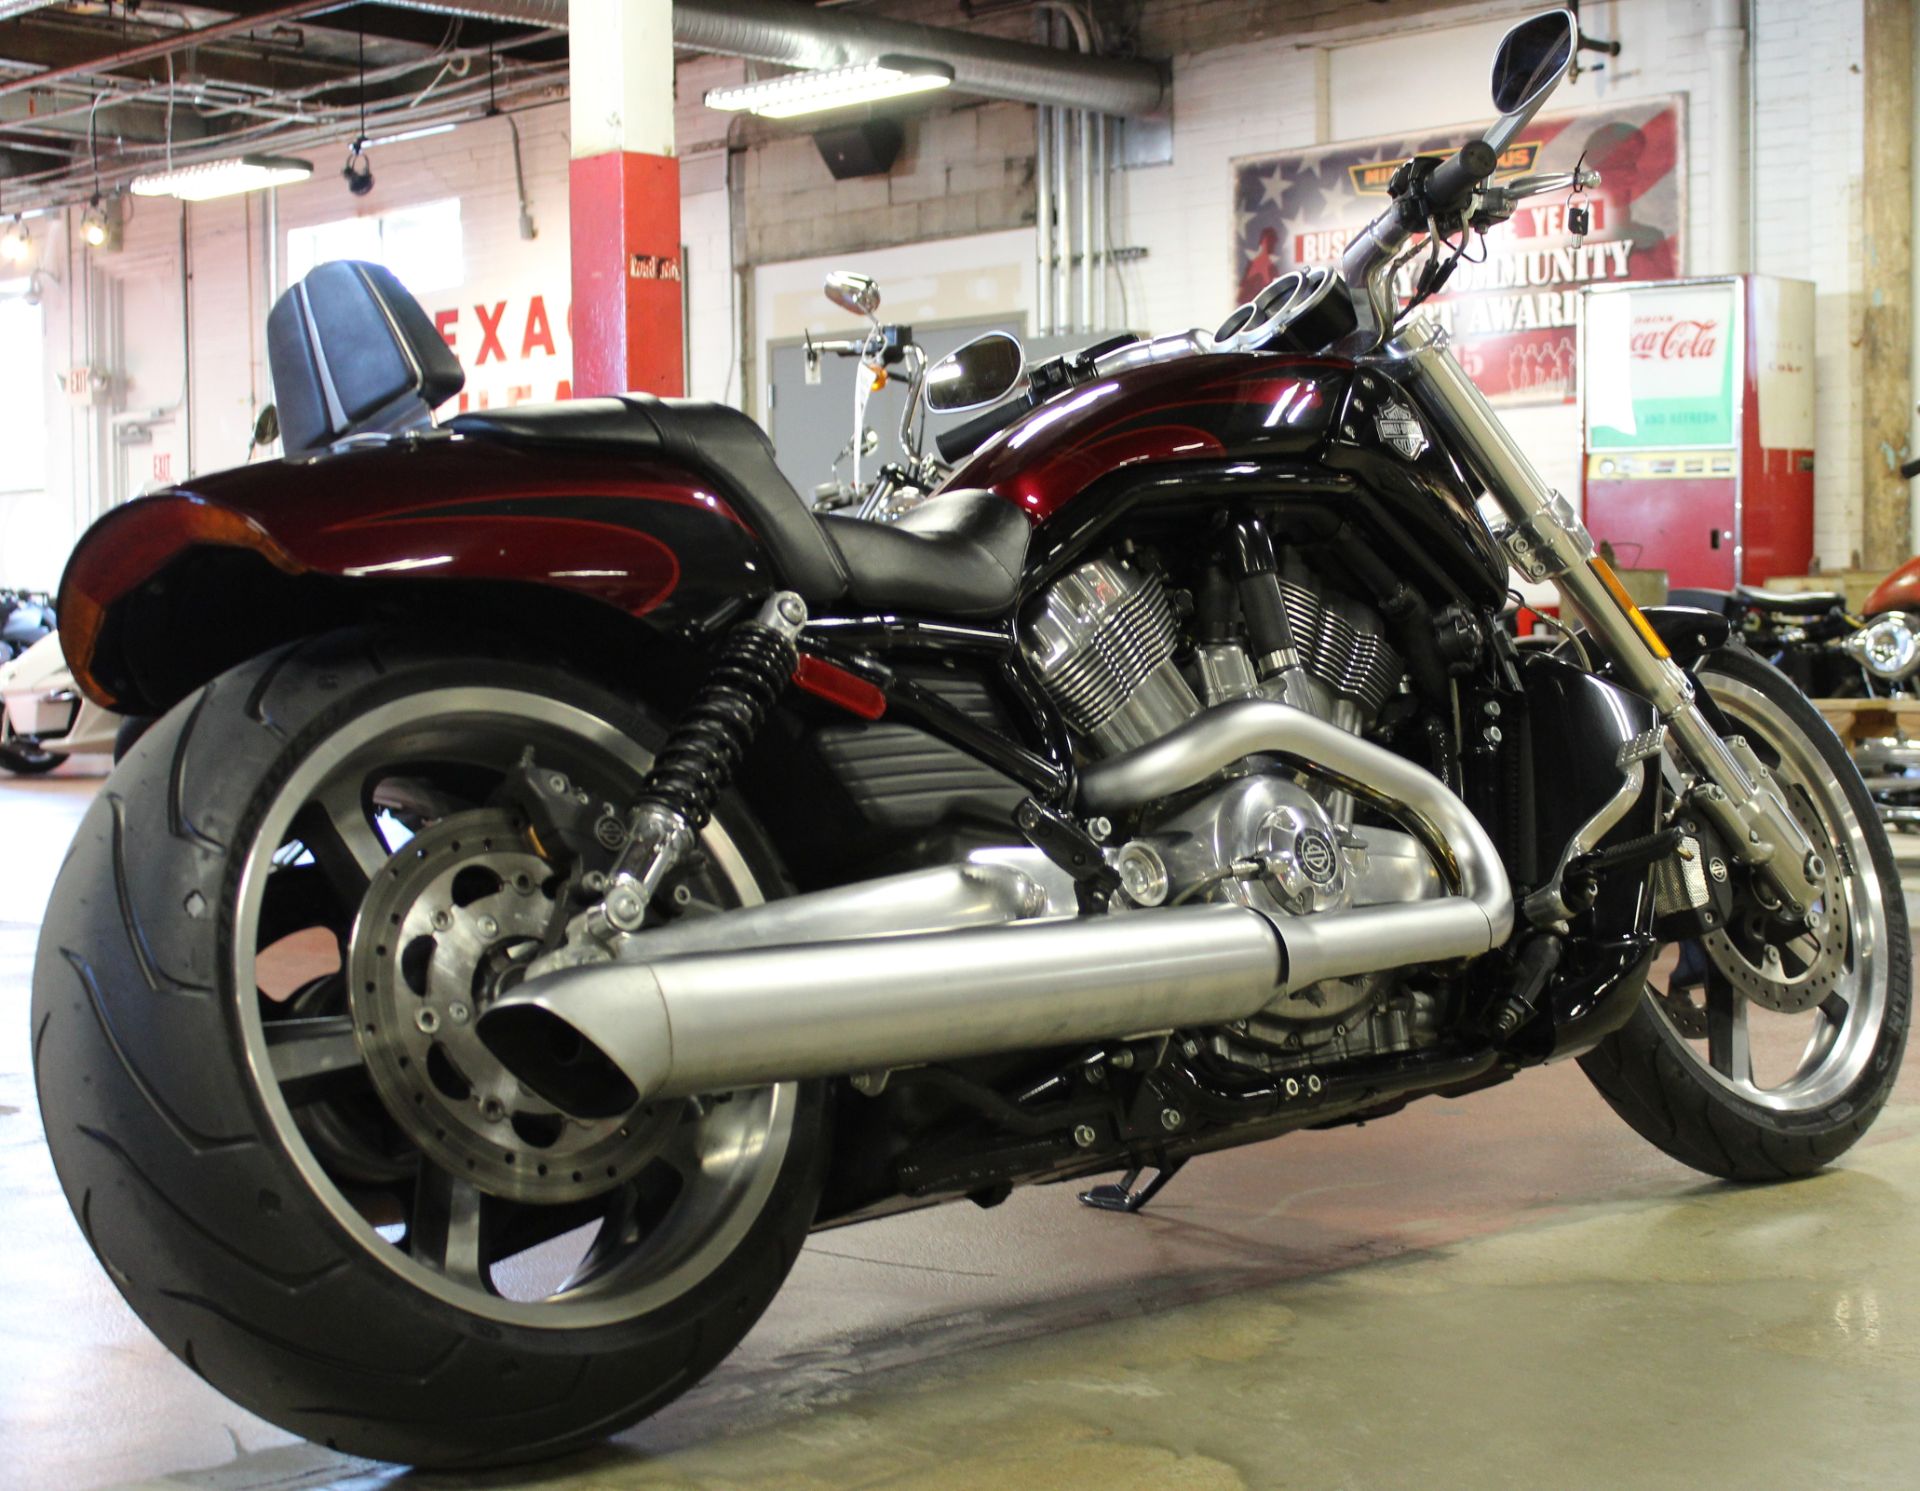 2015 Harley-Davidson V-Rod Muscle® in New London, Connecticut - Photo 8